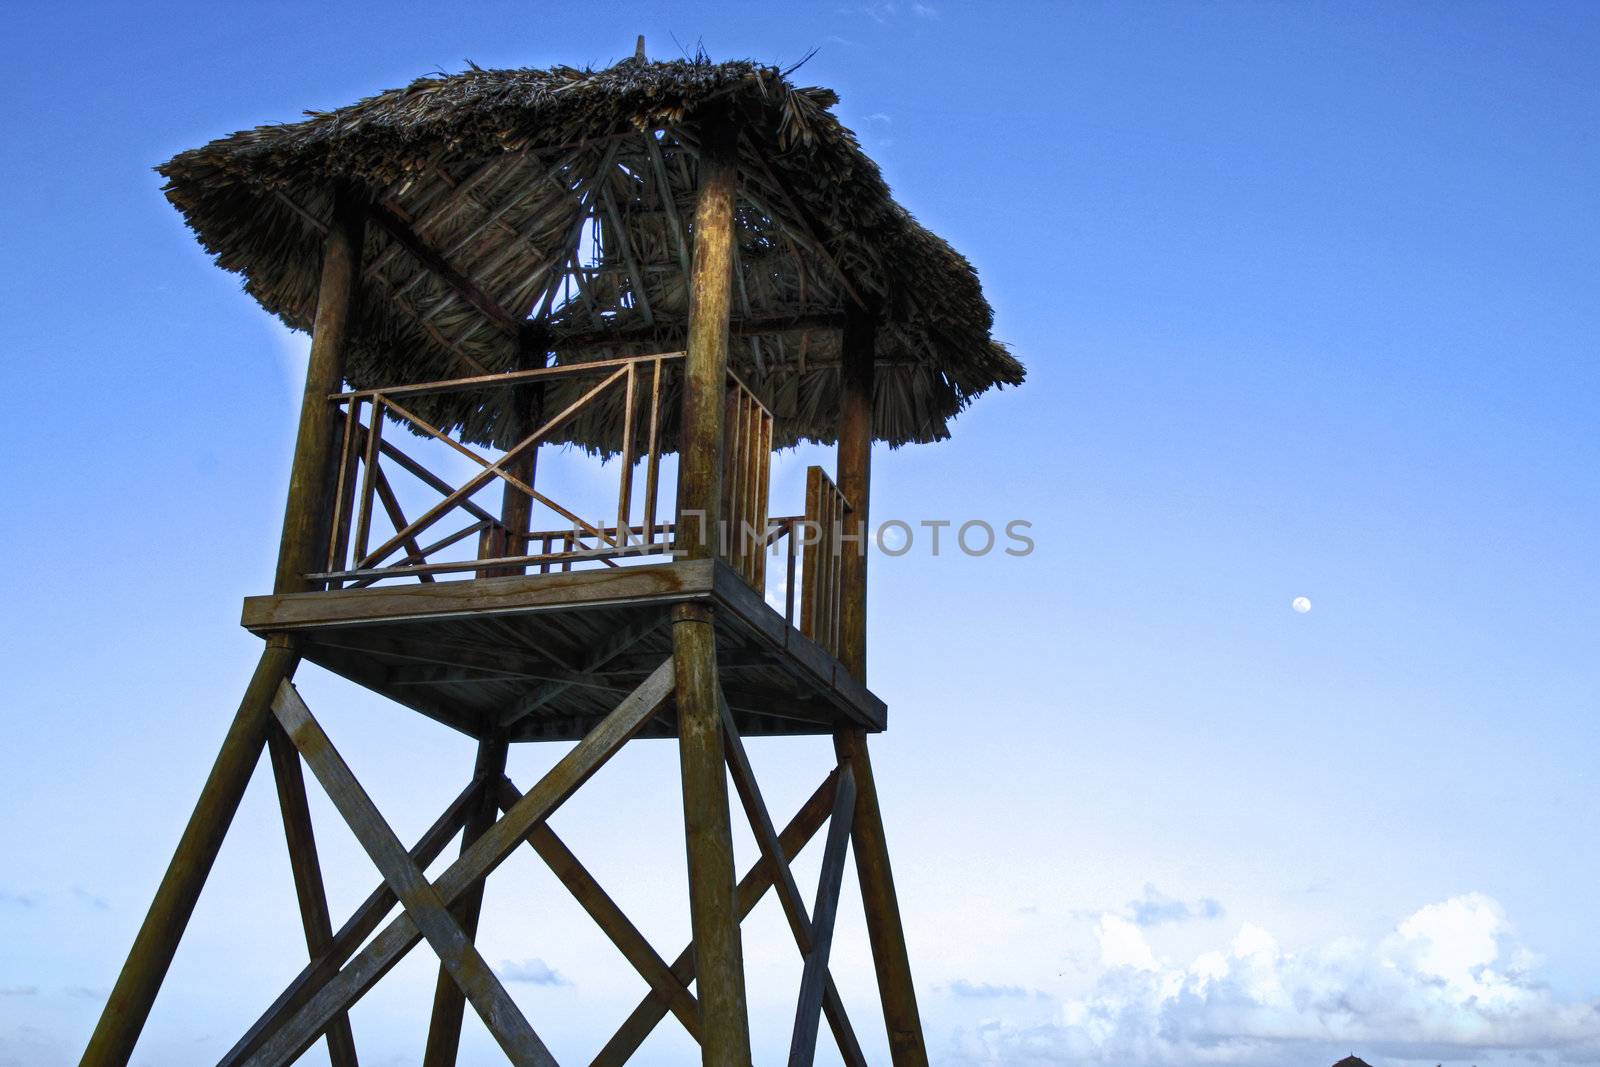 Tropical watchtower overlooking a beach in silhouette